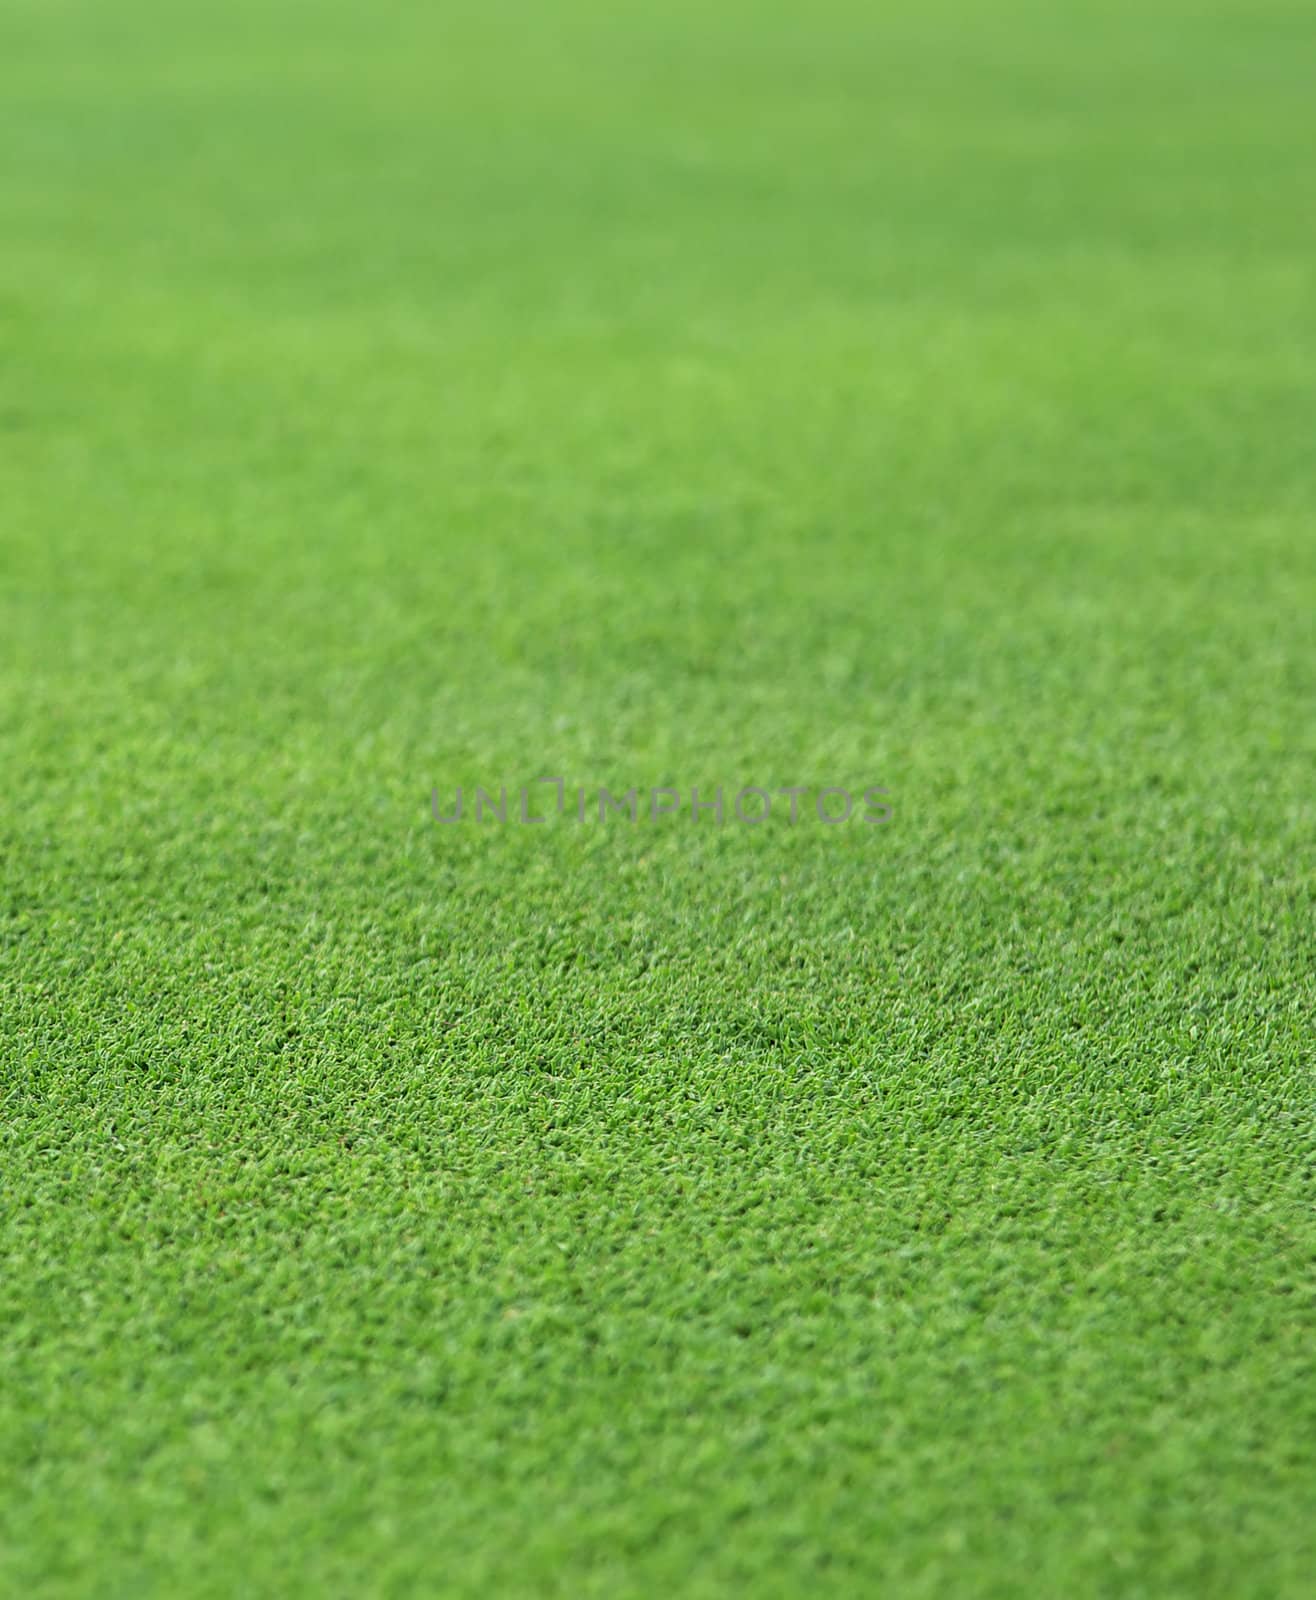 the finely manicured green grass or turf from a golf hole green